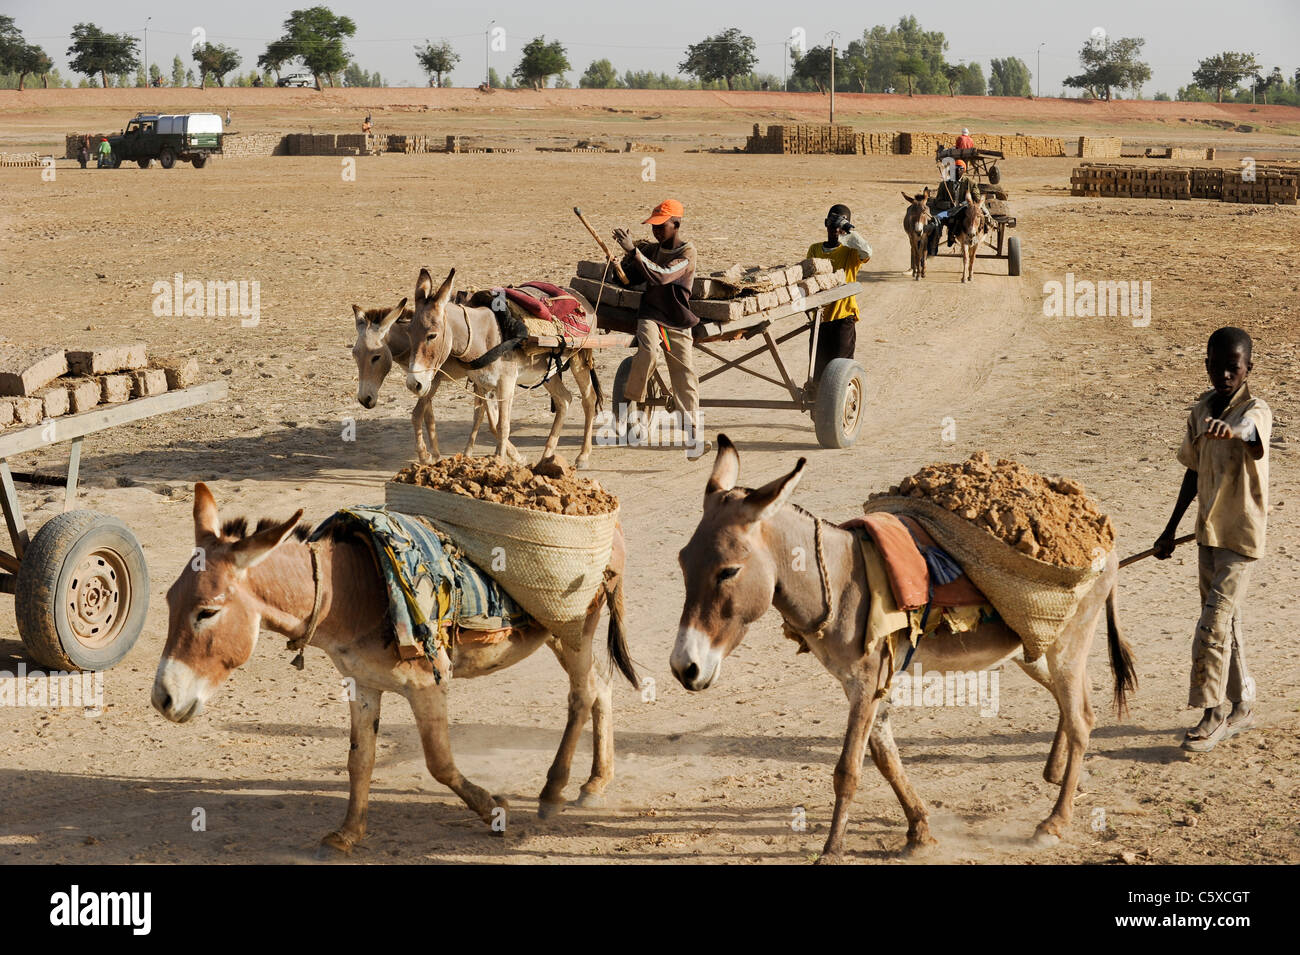 Africa MALI Mopti , clay architecture - worker make clay brick for building, transport with donkey, donkeys are a target by Chinese buyers for export Stock Photo